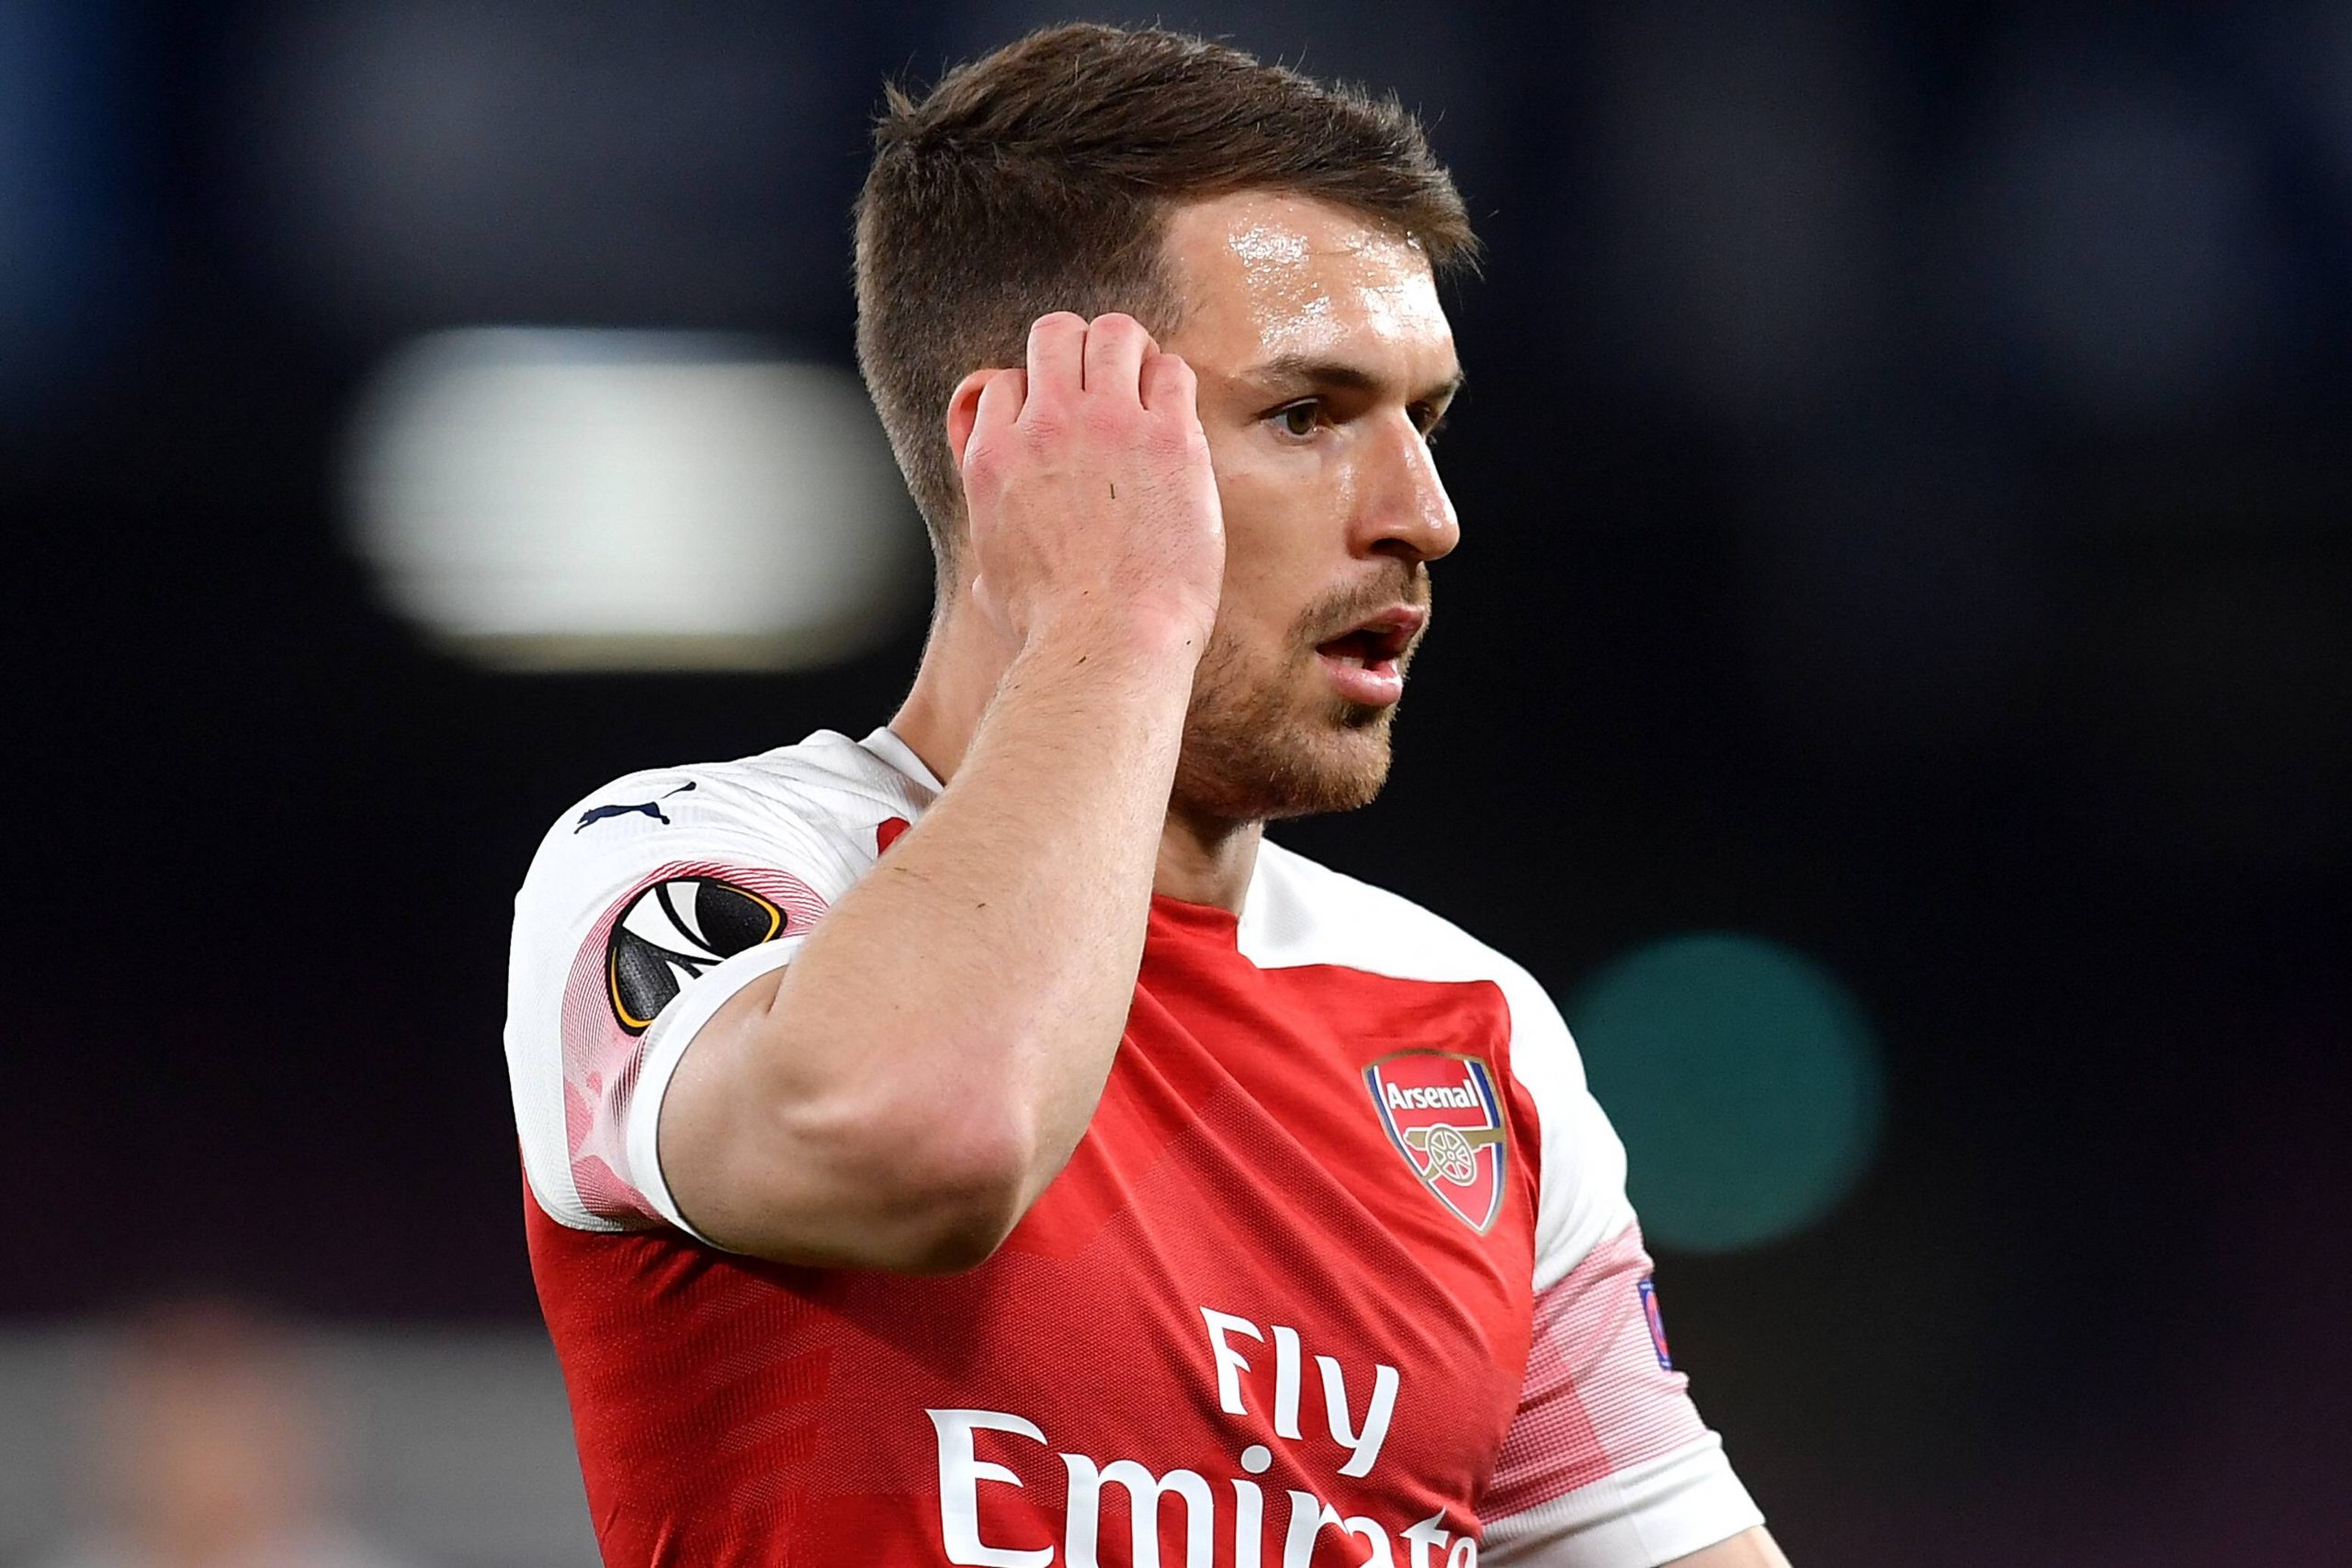 Aaron Ramsey of Arsenal reacts during a Europa League fixture.